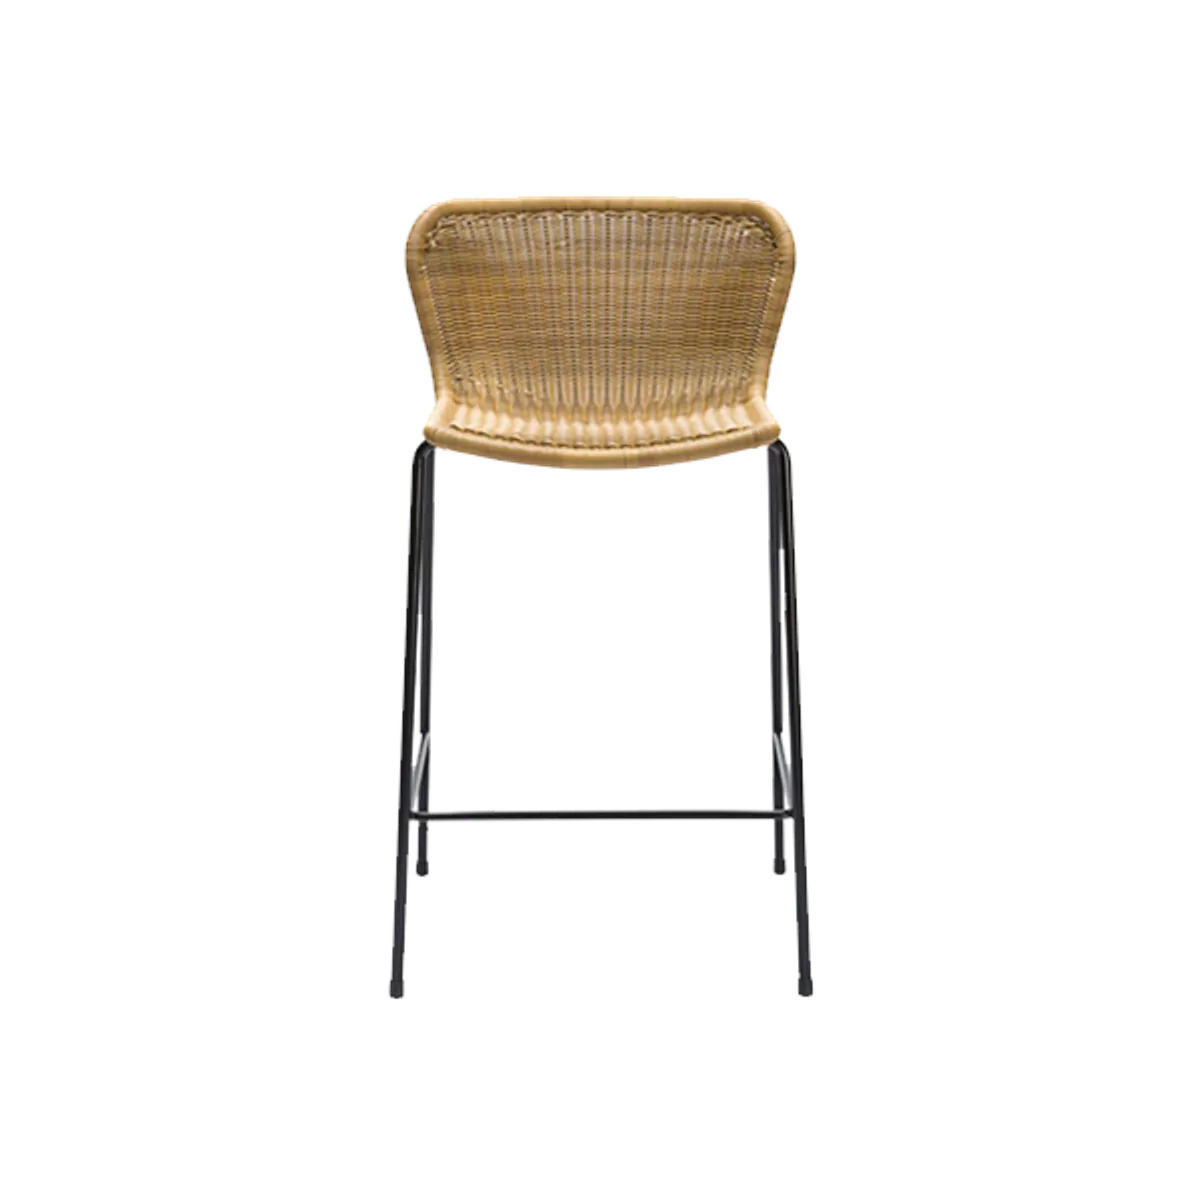 Web Harriet Bar Stool Wicker Seat With Metal Legs For Outdoor Use 019